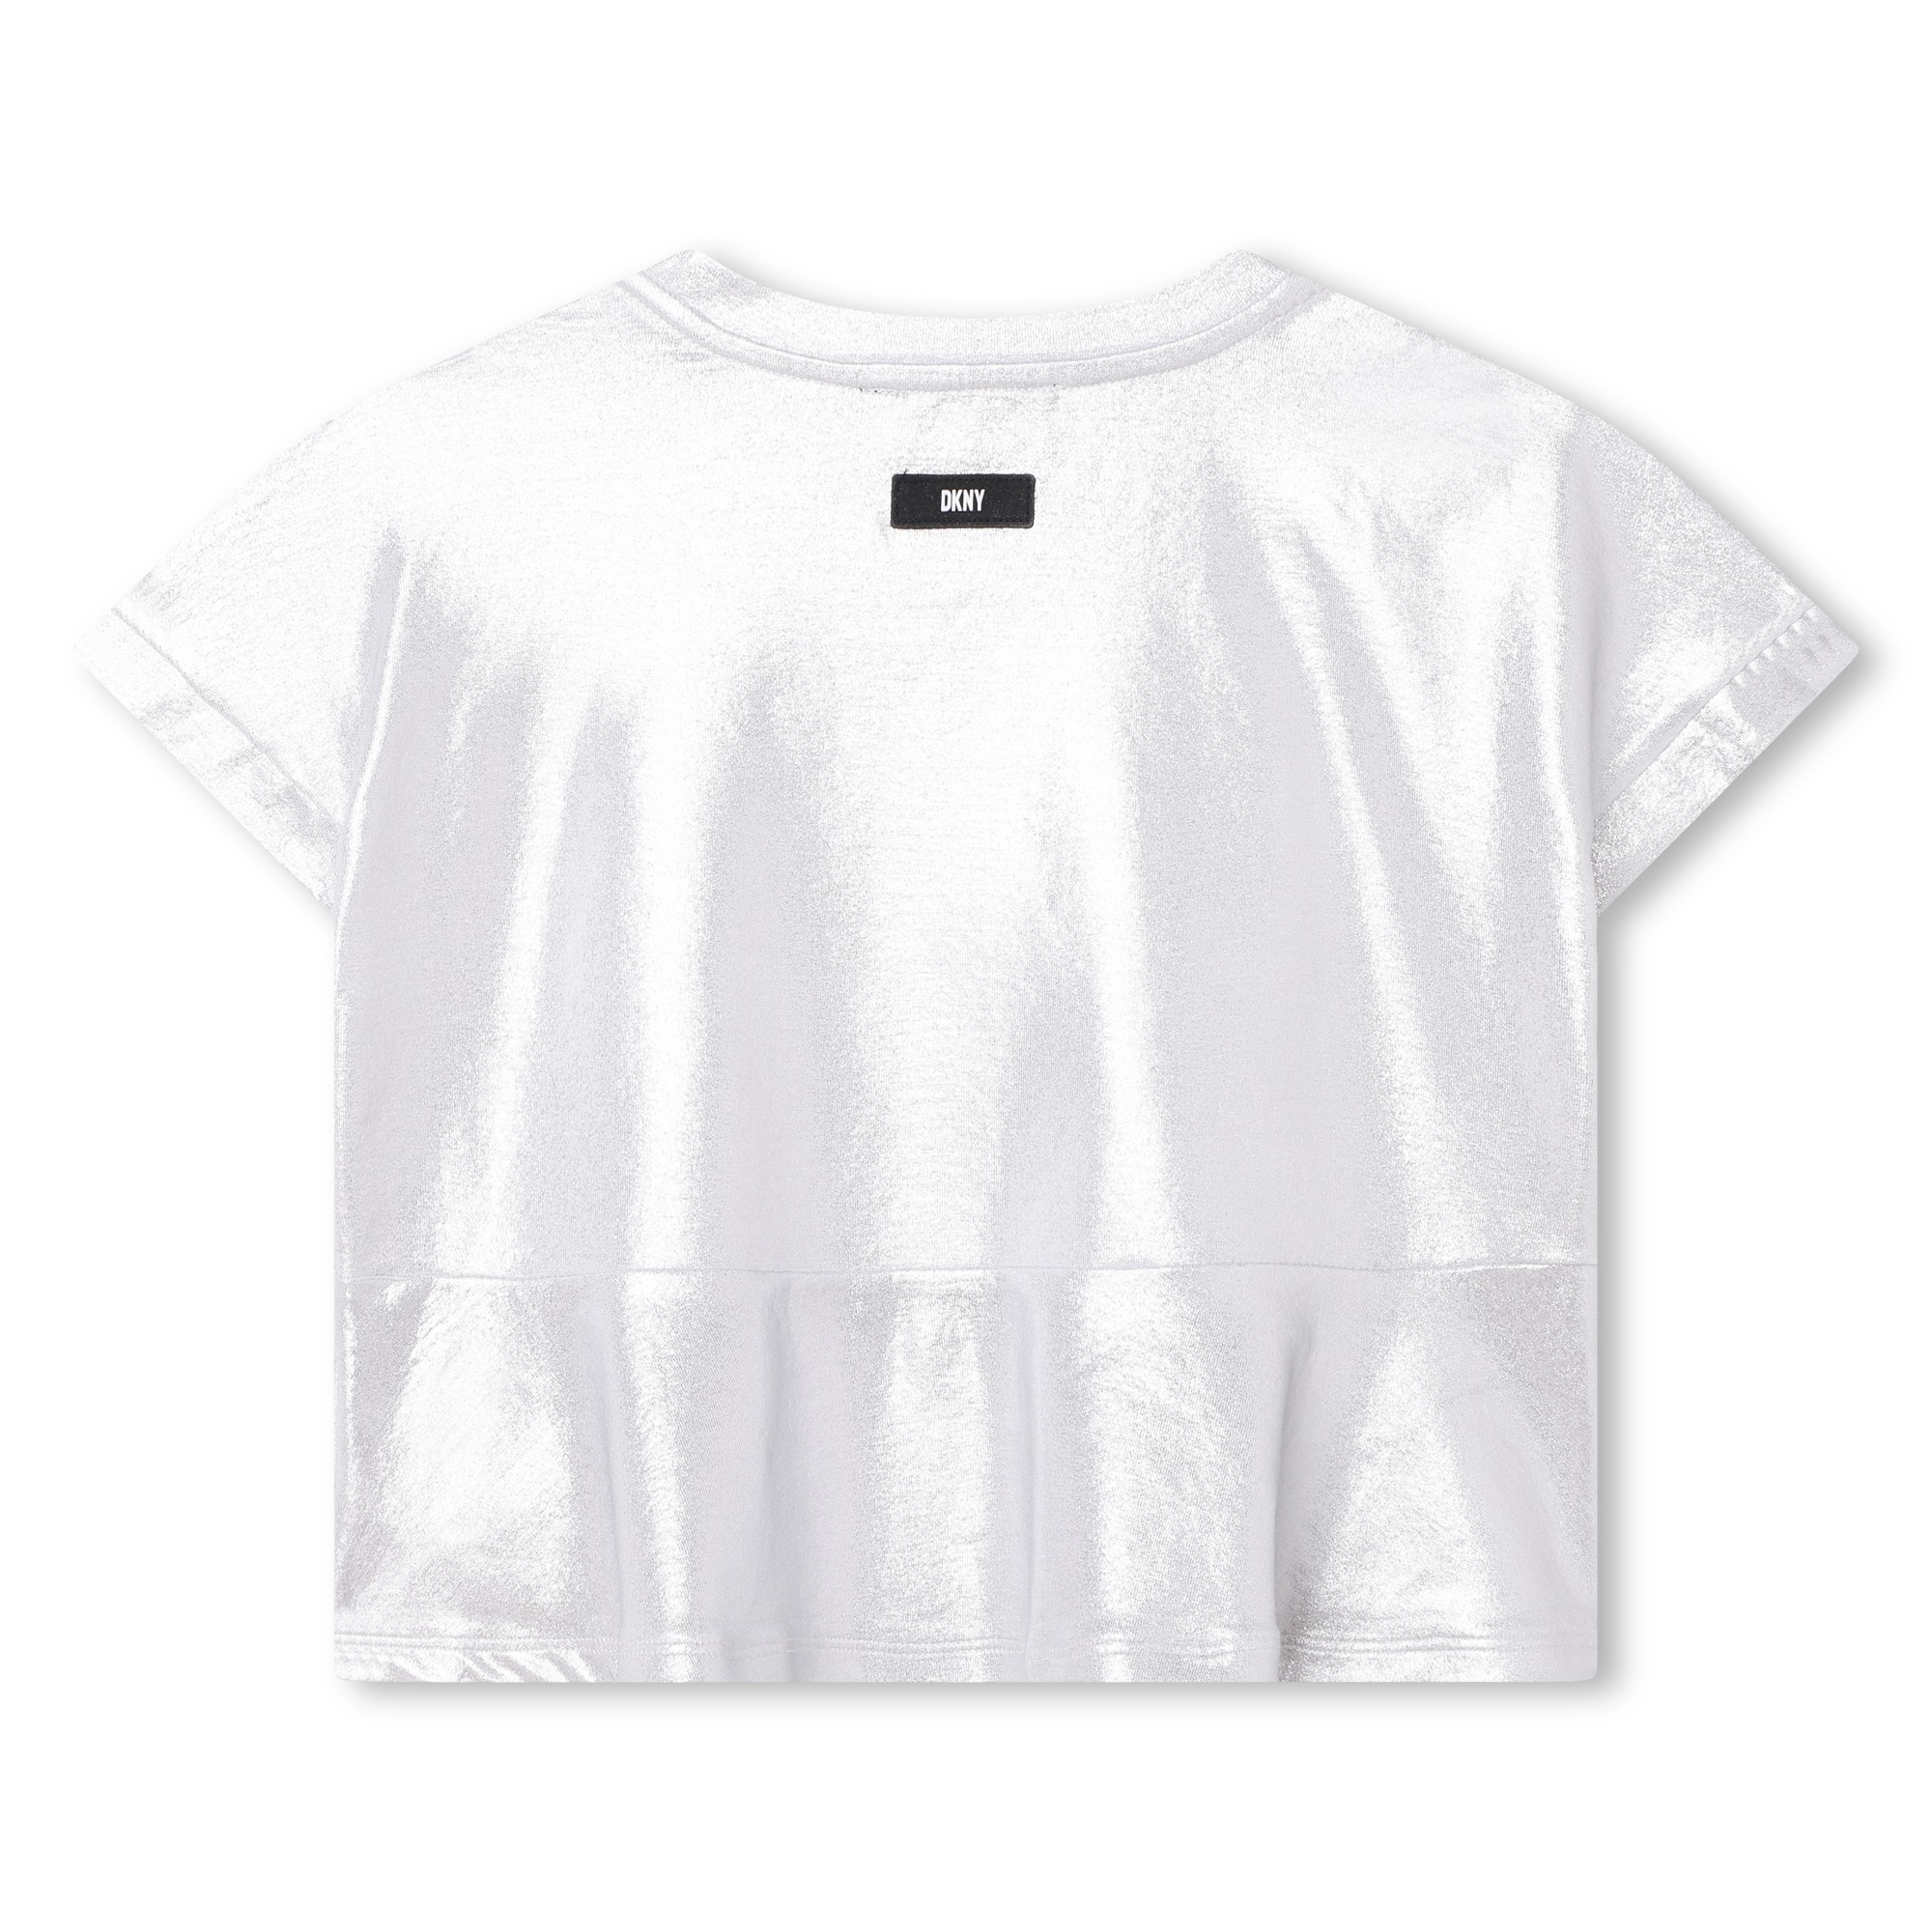 Metallic party T-shirt DKNY for GIRL